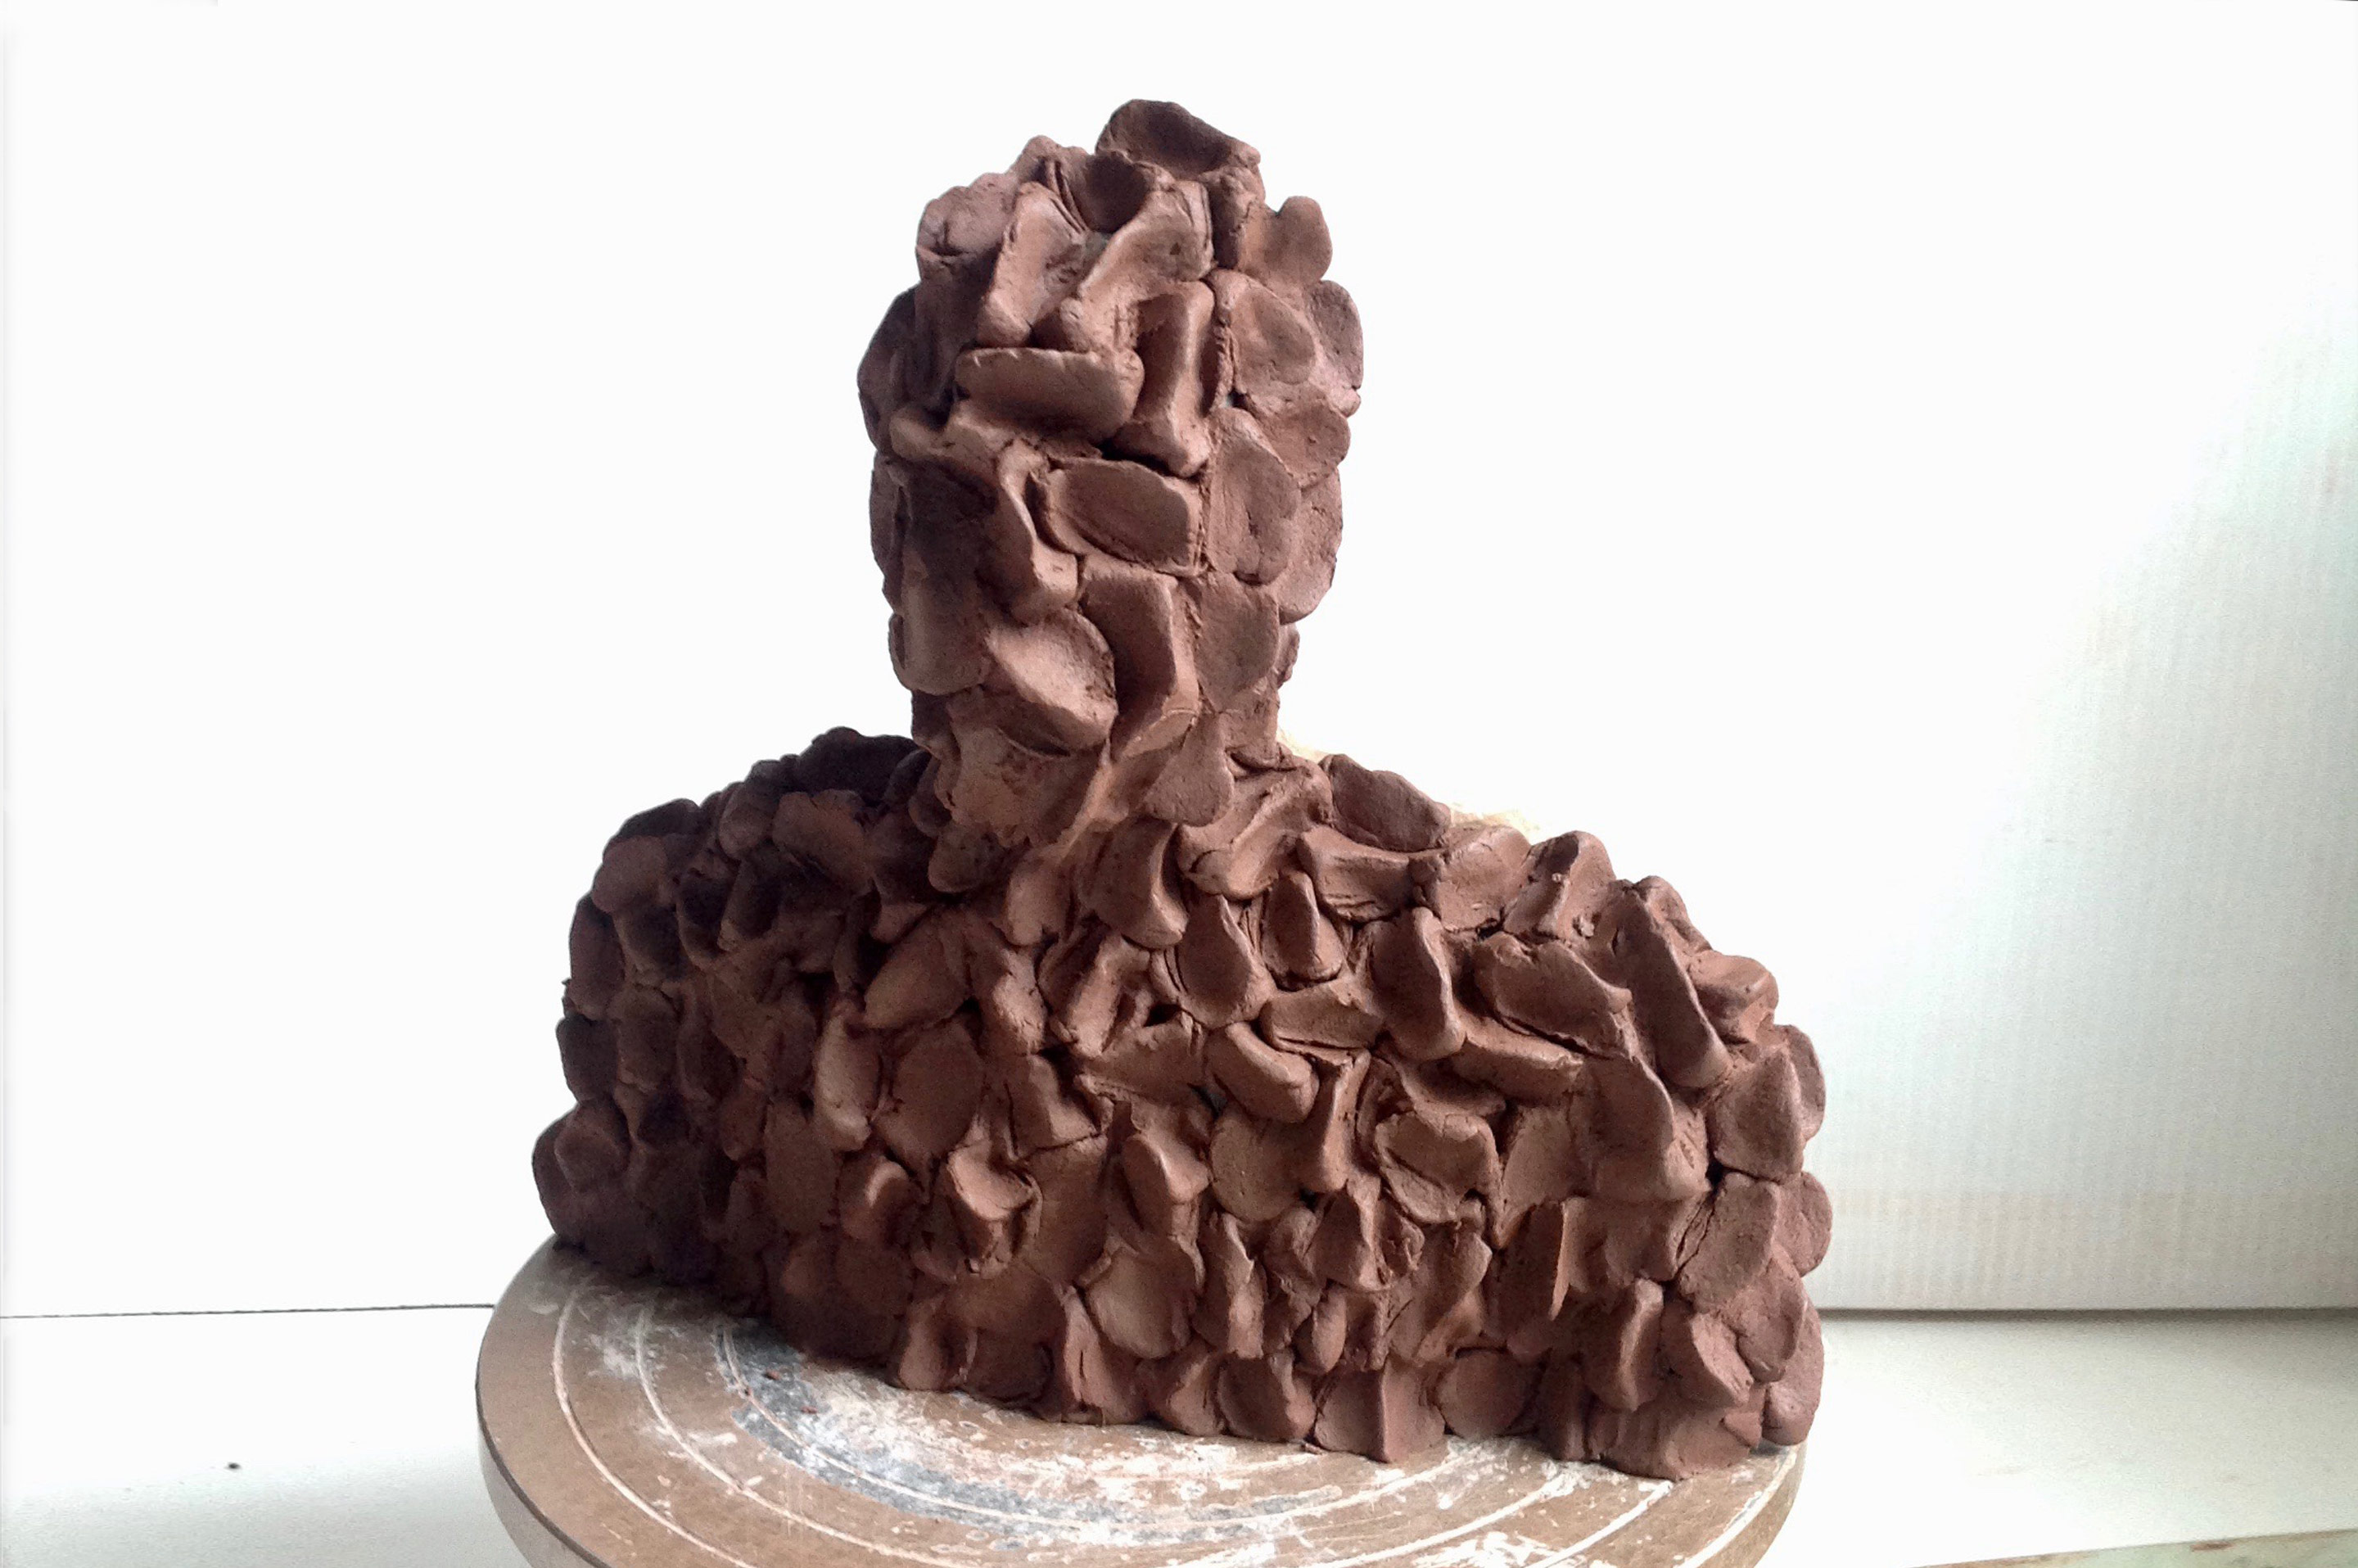 Clay figure in progress. One of the elements from 'Enlightenment', a rolling project installation in mixed media